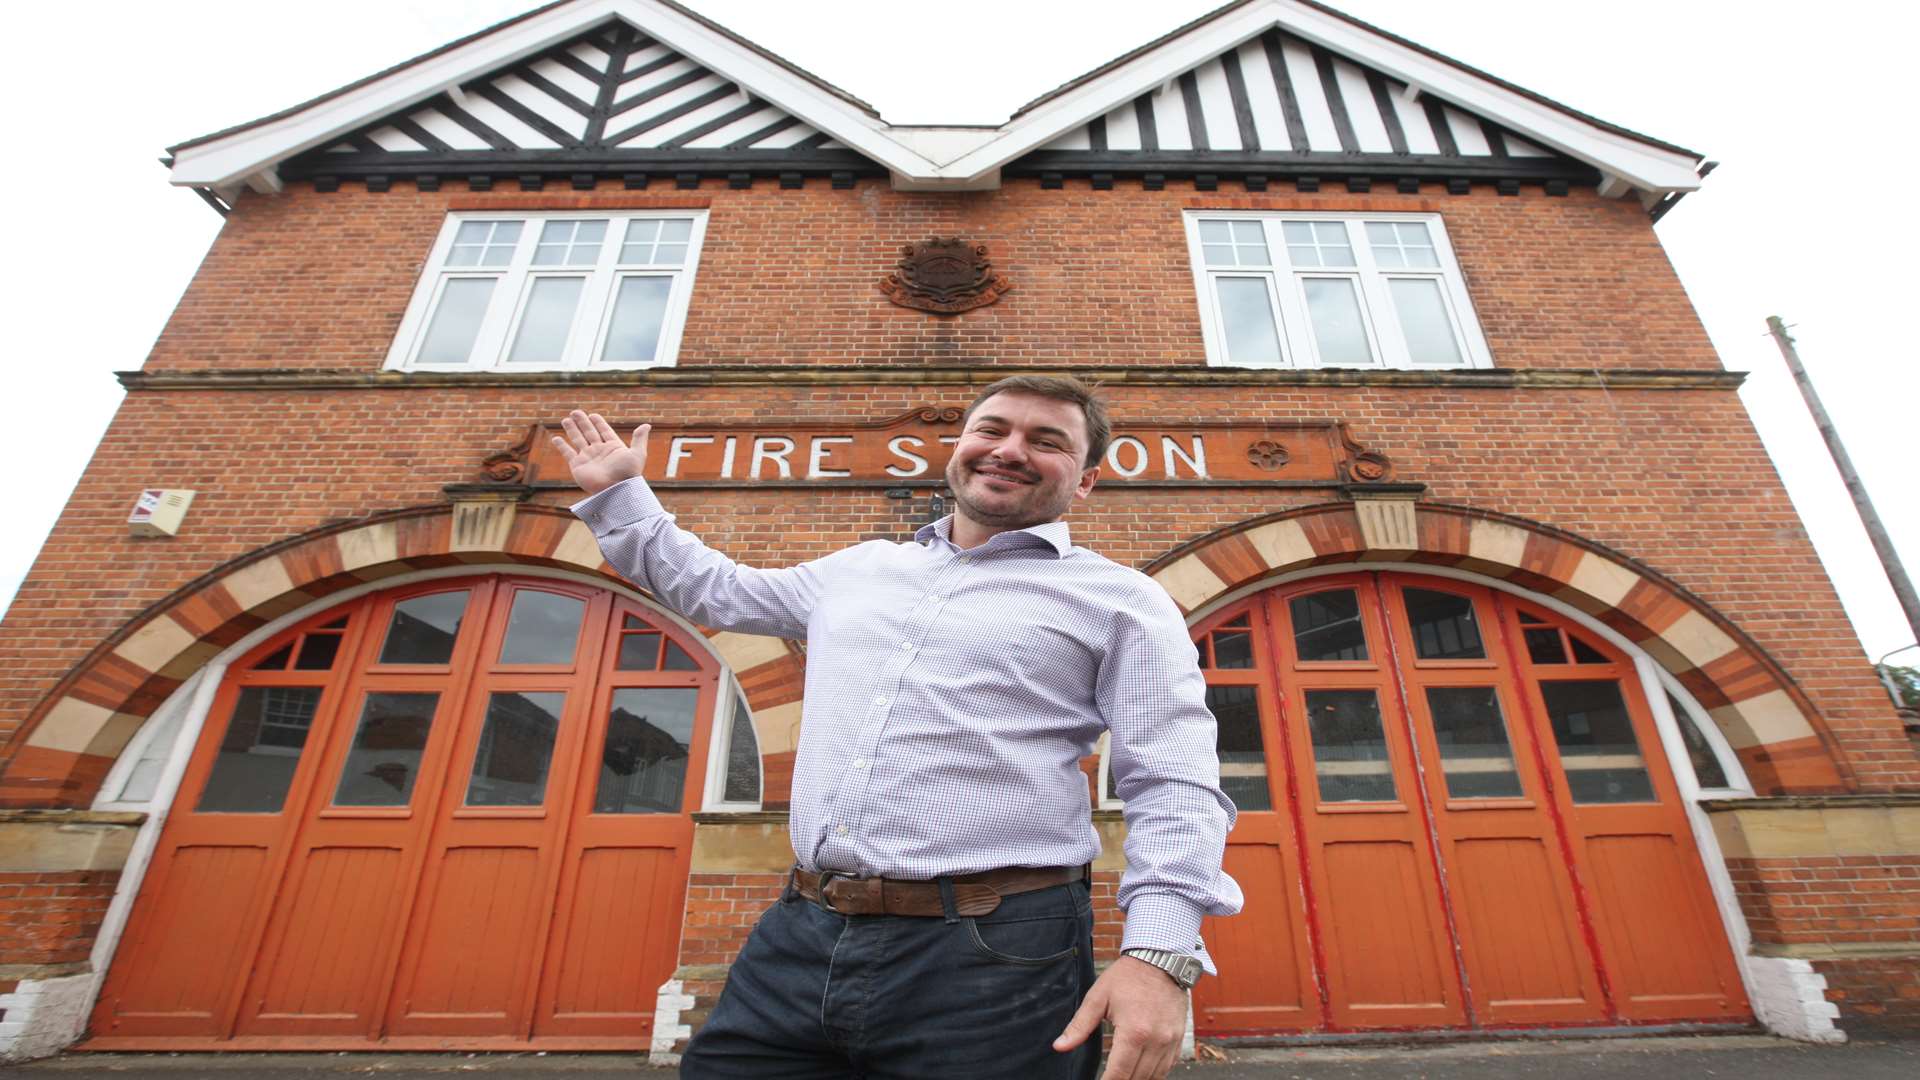 Richard Collins is re-vamping the Old Fire Station